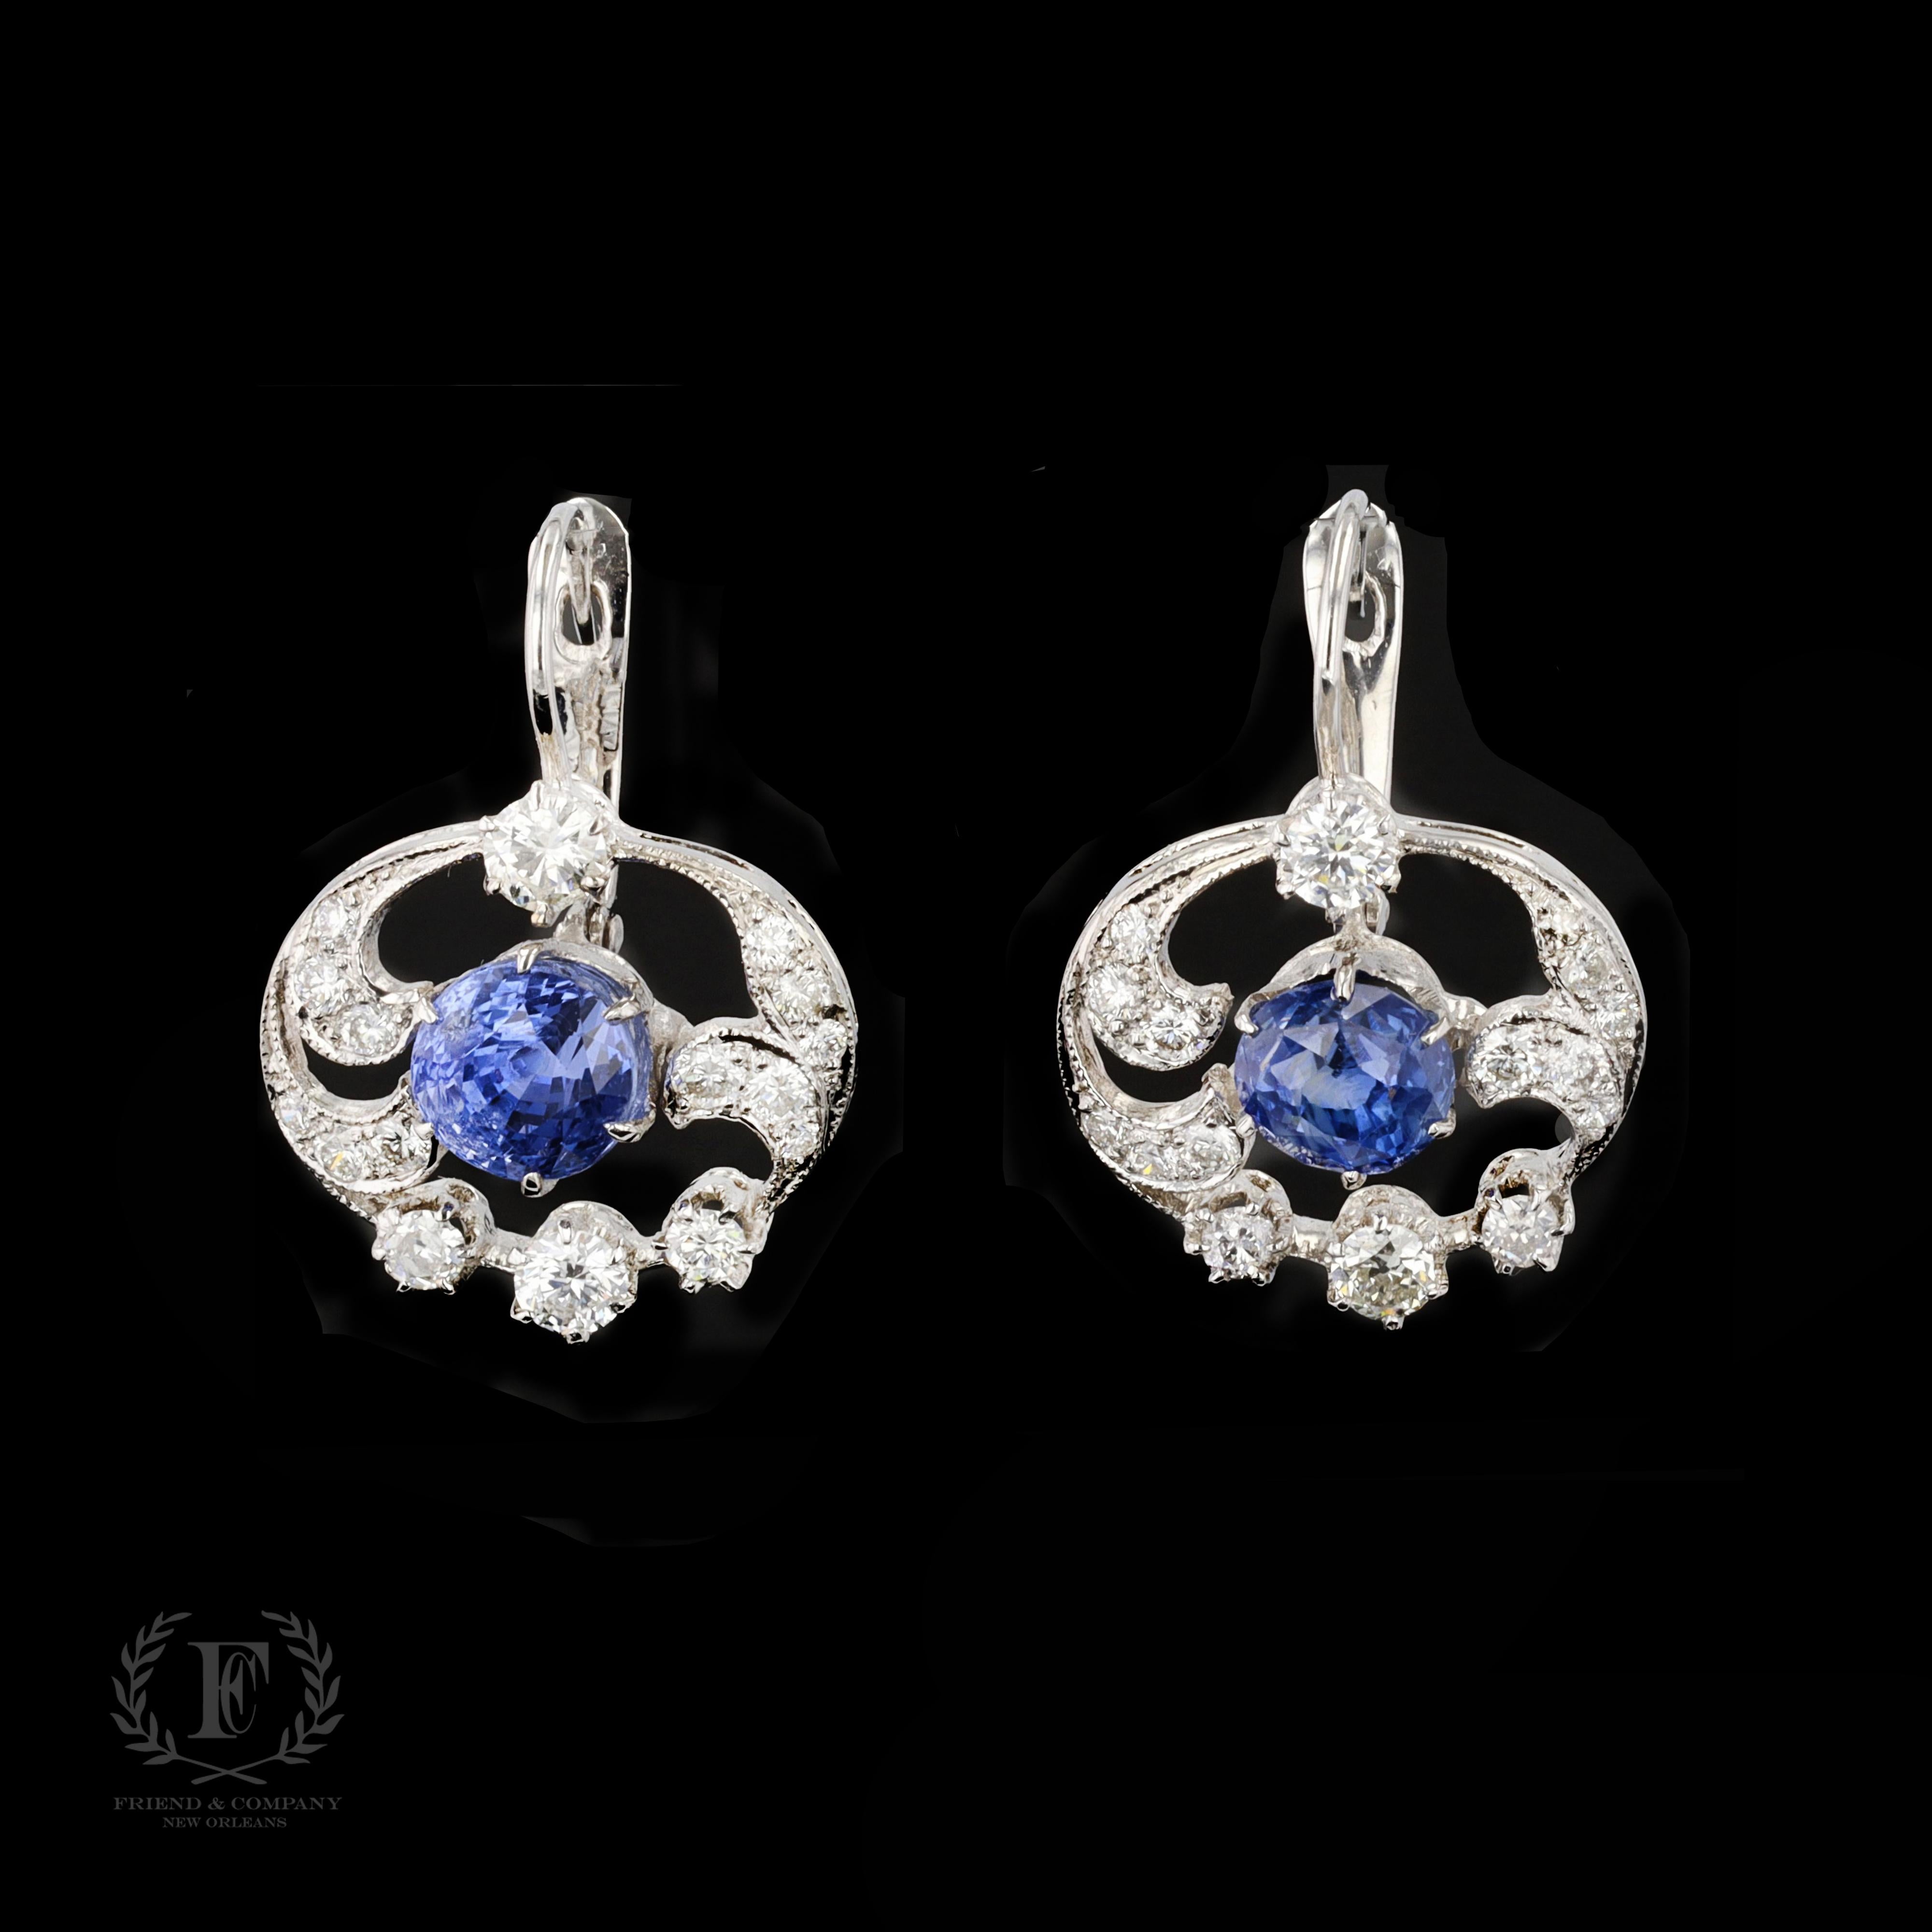 Spectacular round cut diamonds and round cut sapphires sparkle in these elegant 18 karat white gold drop style earrings. Featuring French style backs, the earrings contain 4.30 carats of round cut sapphires and 1.33 carats of round cut diamonds. The